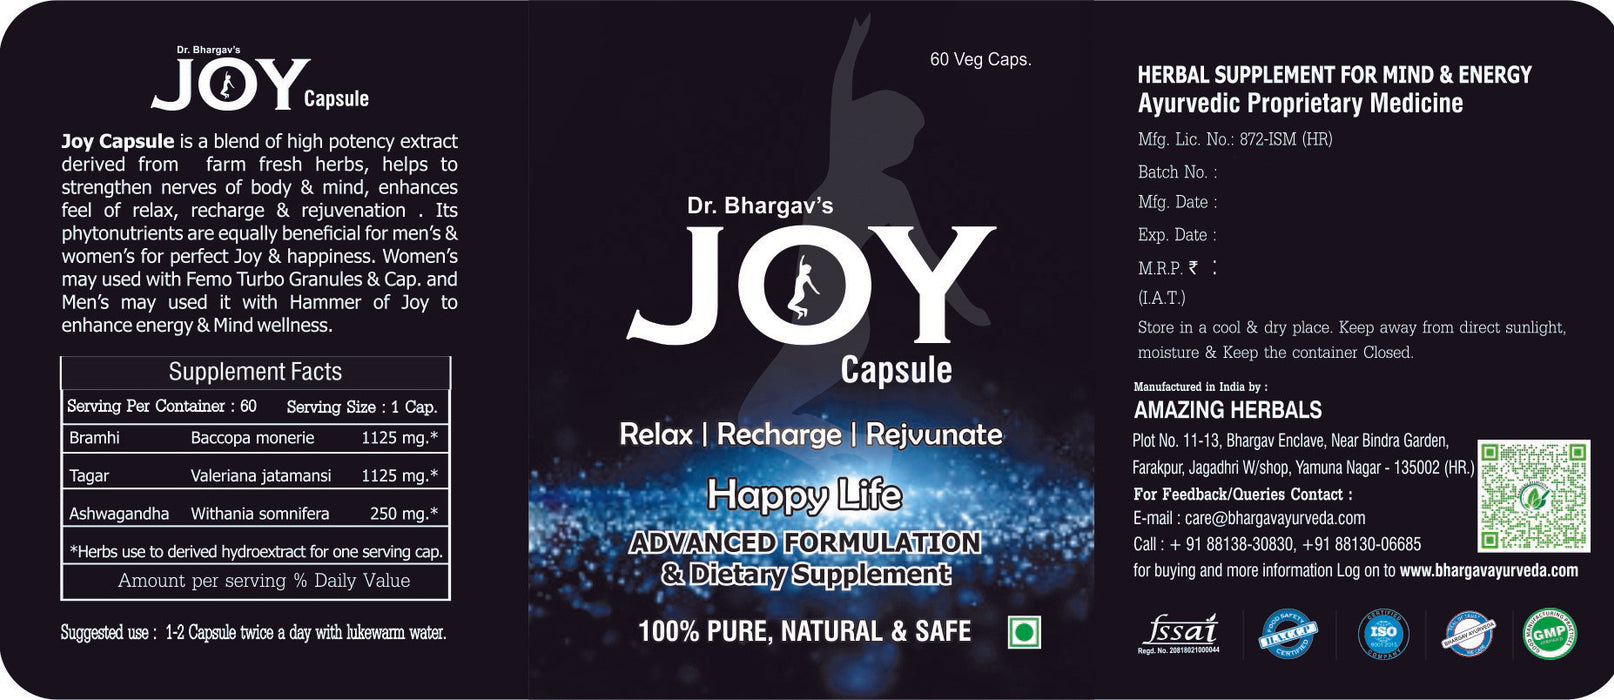 Dr. Bhargav’s – Joy tablet for Relax, Recharge & RejuveNAte |Relieves stress & calms mind |100% NAtural & pure ayurvedic Formulation |Fights Stress| MaNAge Insomnia | Fights depression when taken together with Dr. Bhargav’s Femo-turbo Capsule| 60 Tablet